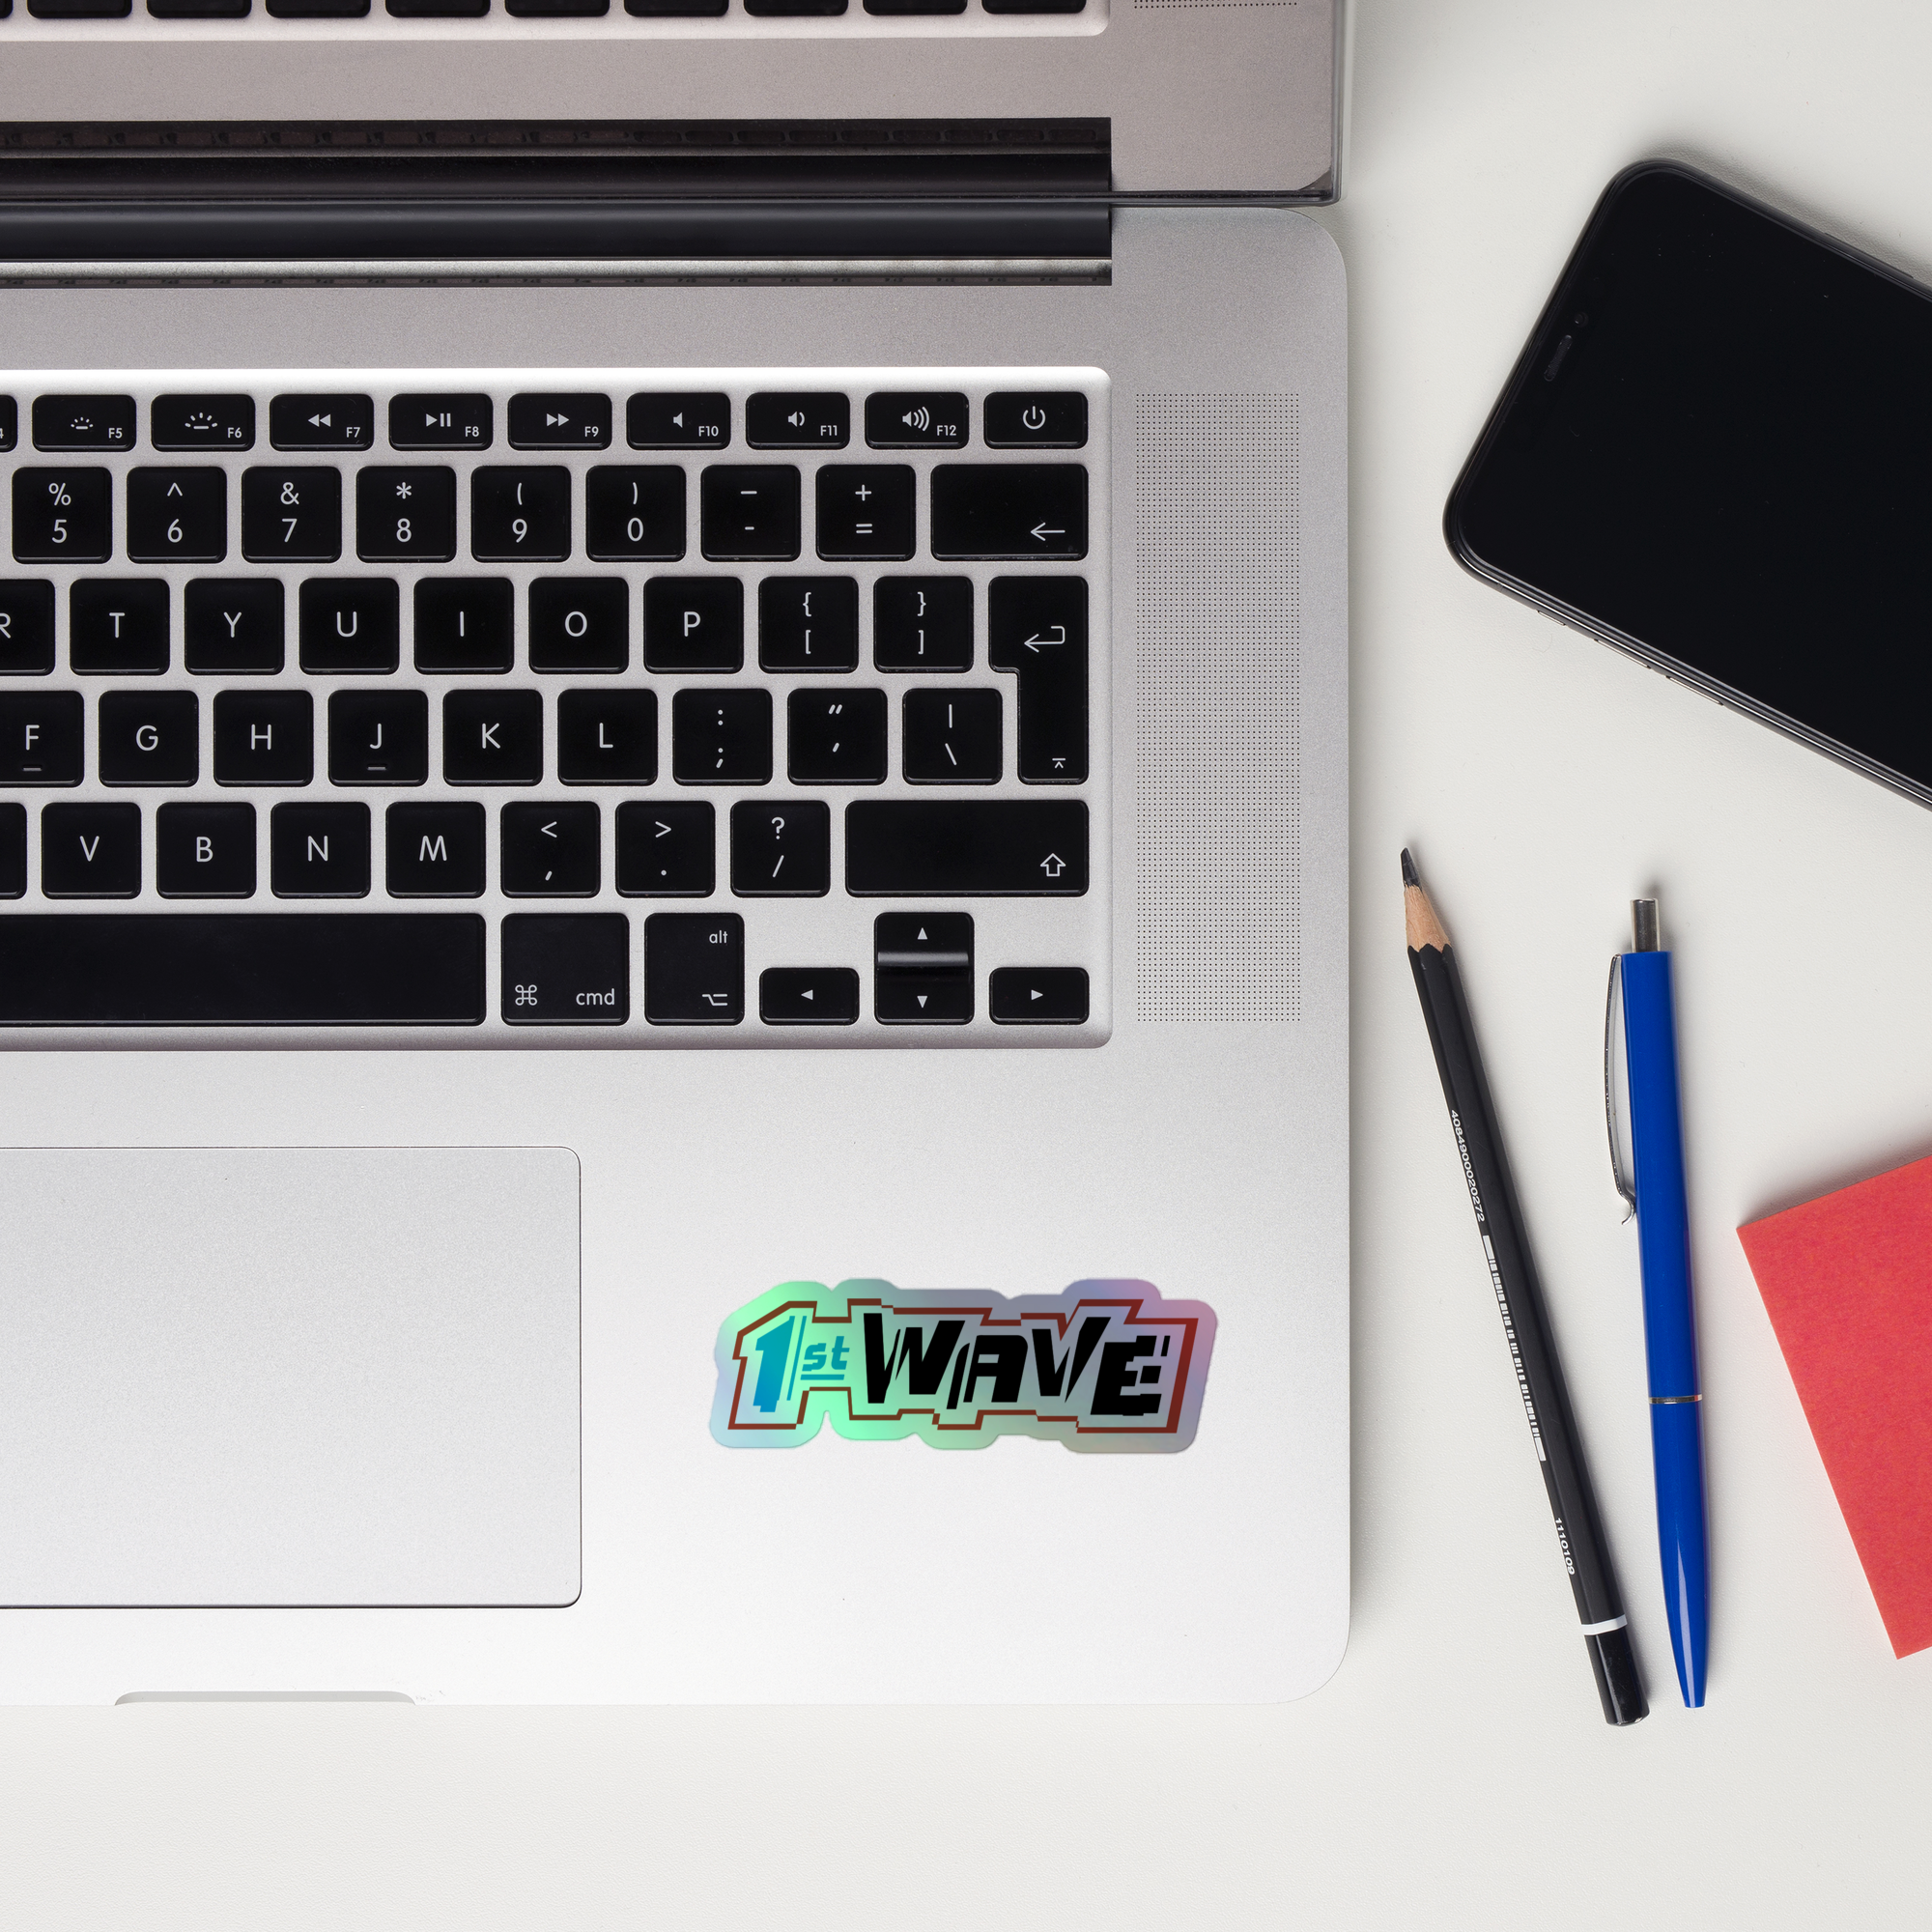 1st Wave: Holographic Sticker